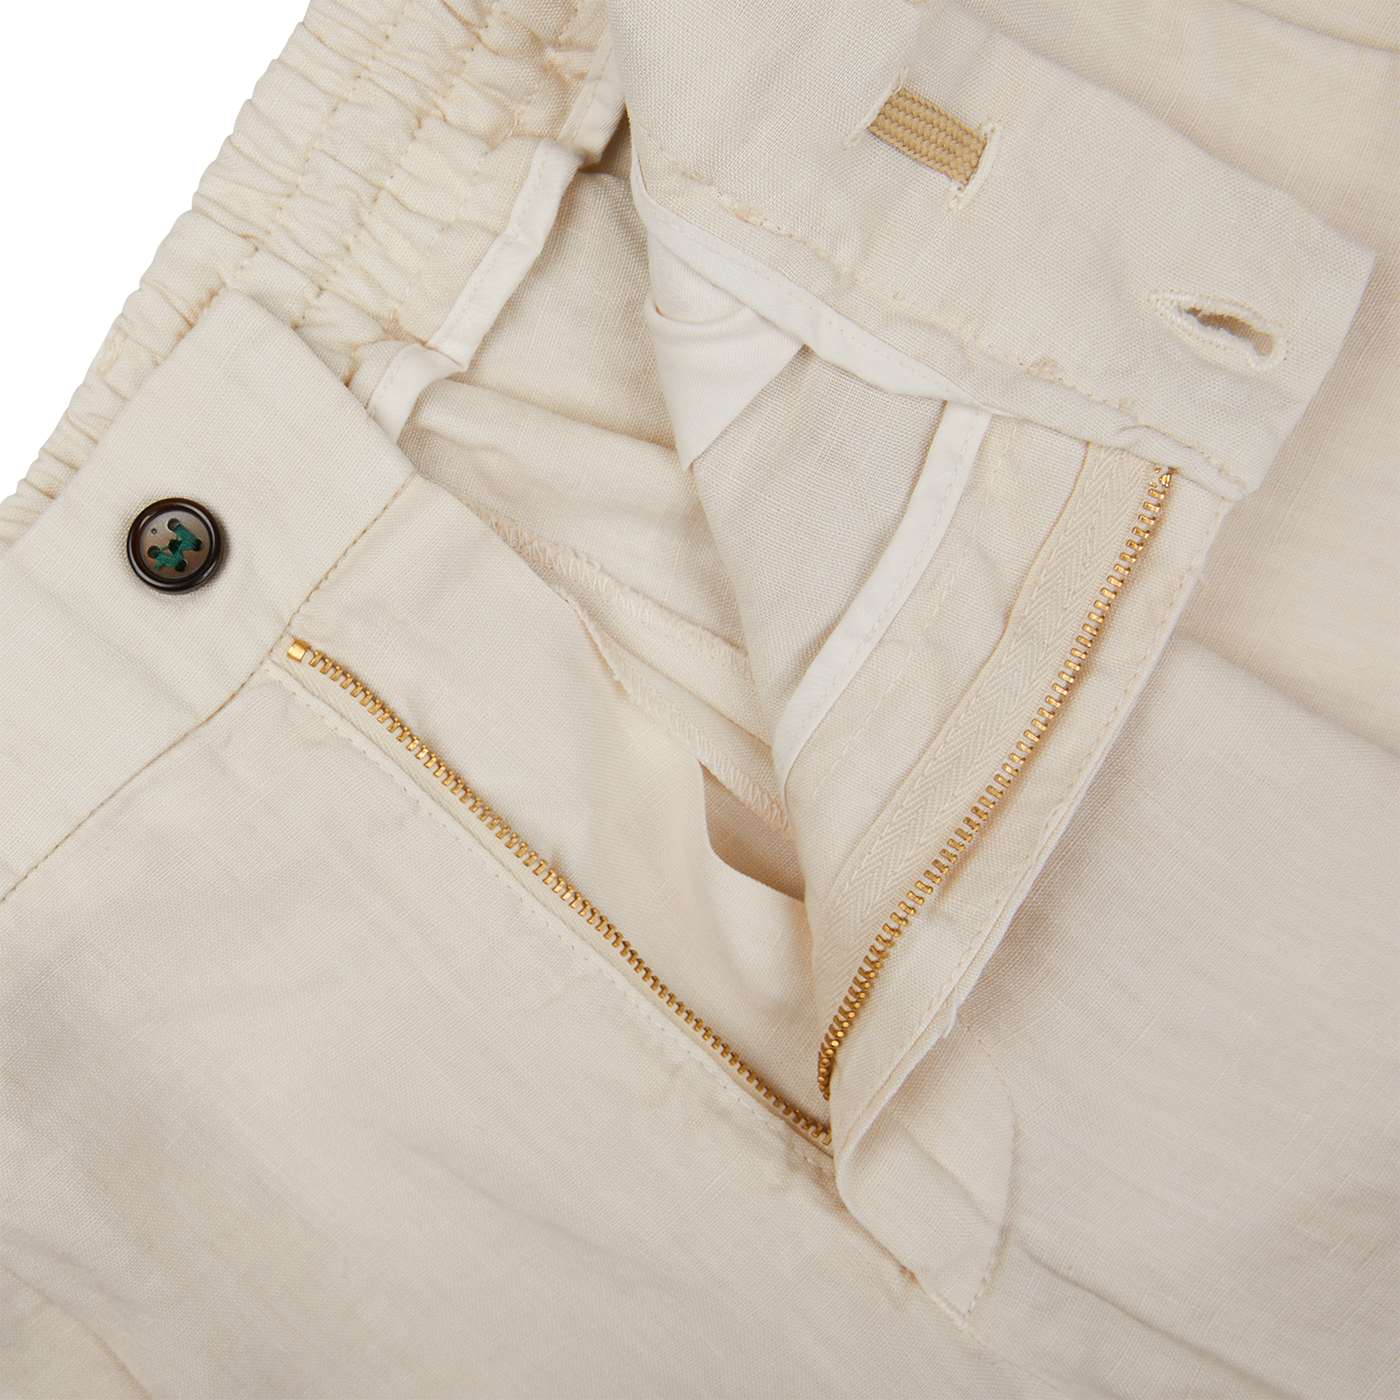 A pair of Cream Linen Twill Drawstring Trousers by Berwich with gold zippers.